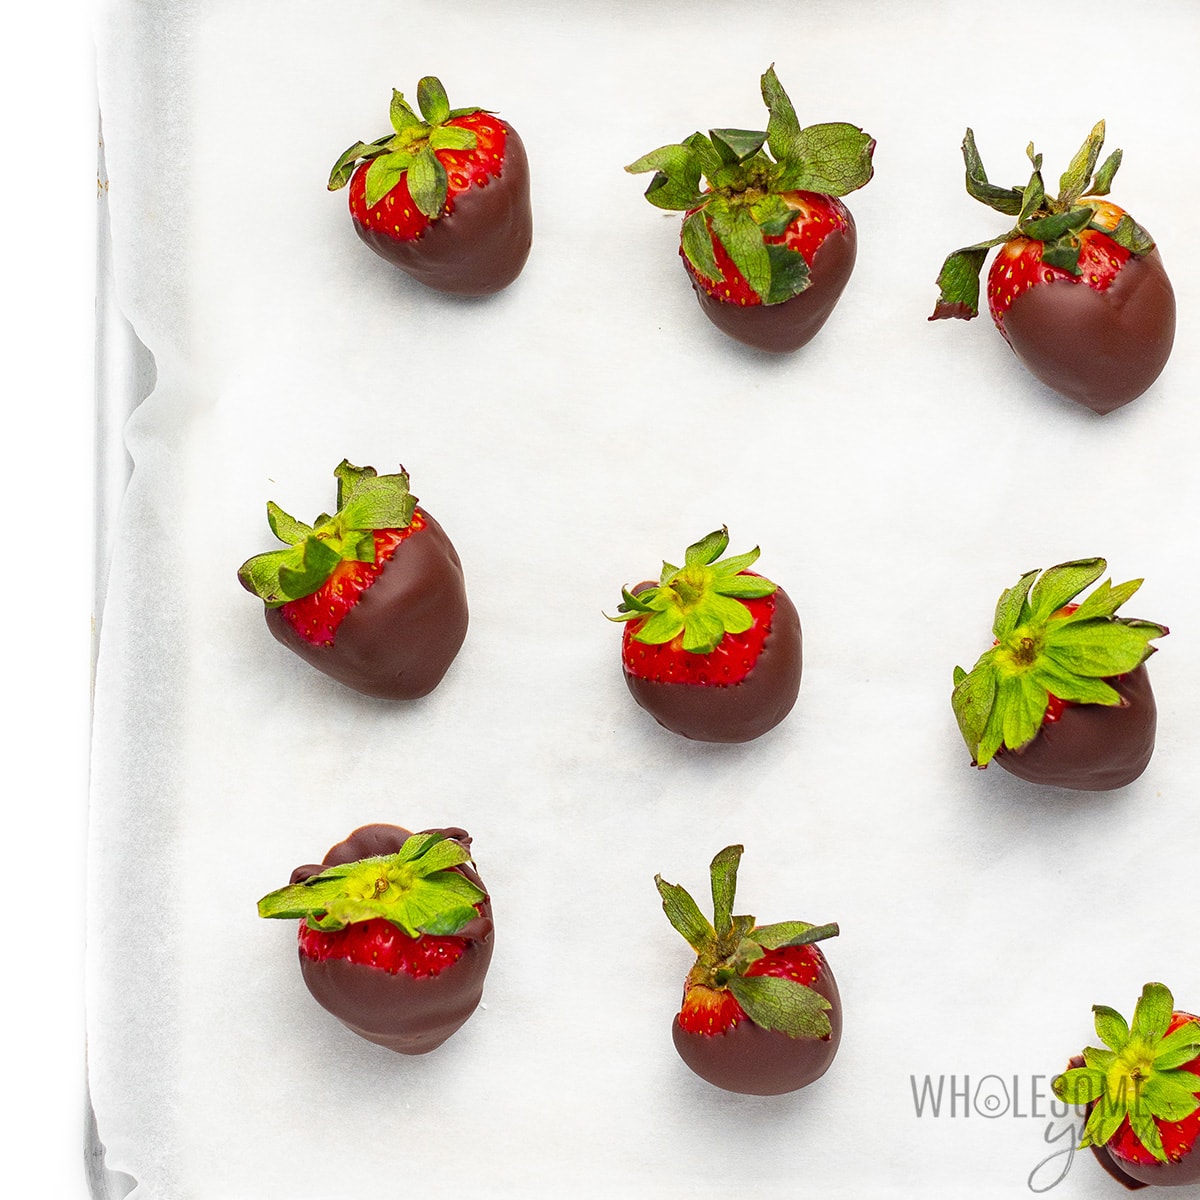 Sugar-free chocolate covered strawberries on a parchment lined baking sheet.